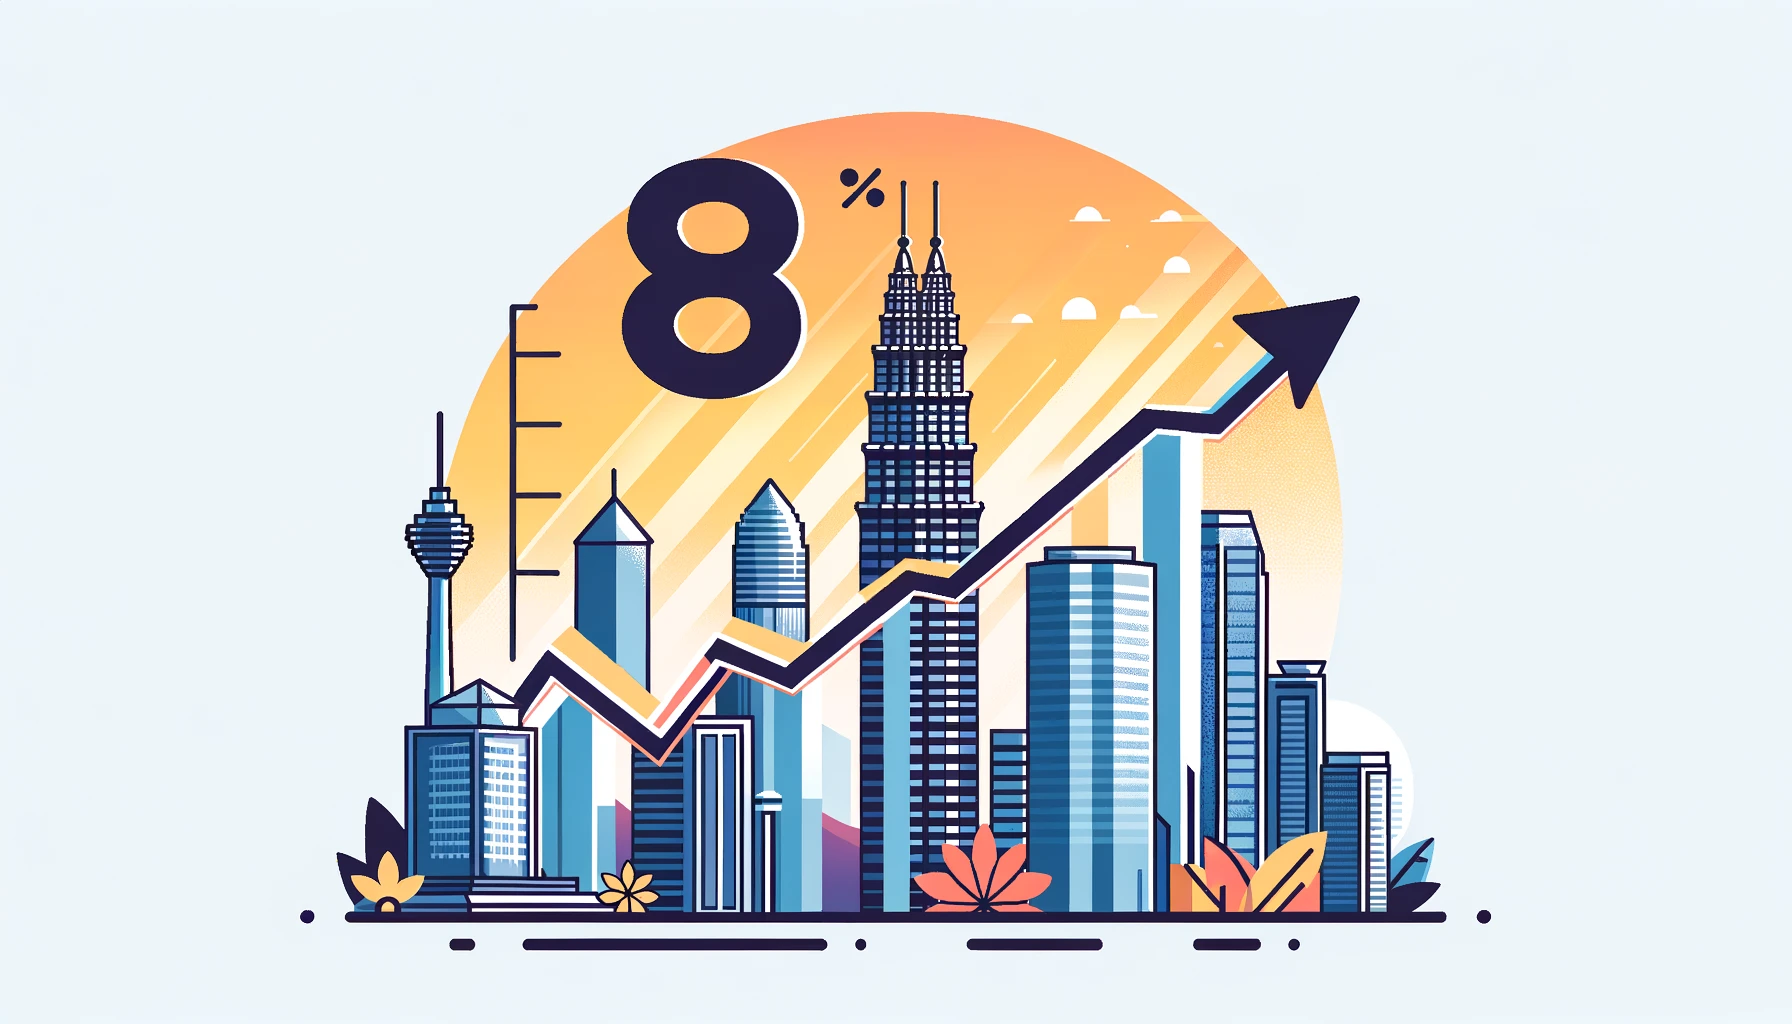 Revenue in Malaysia’s services sector increased by 8% to a huge total of RM2.3 trillion in 2023.